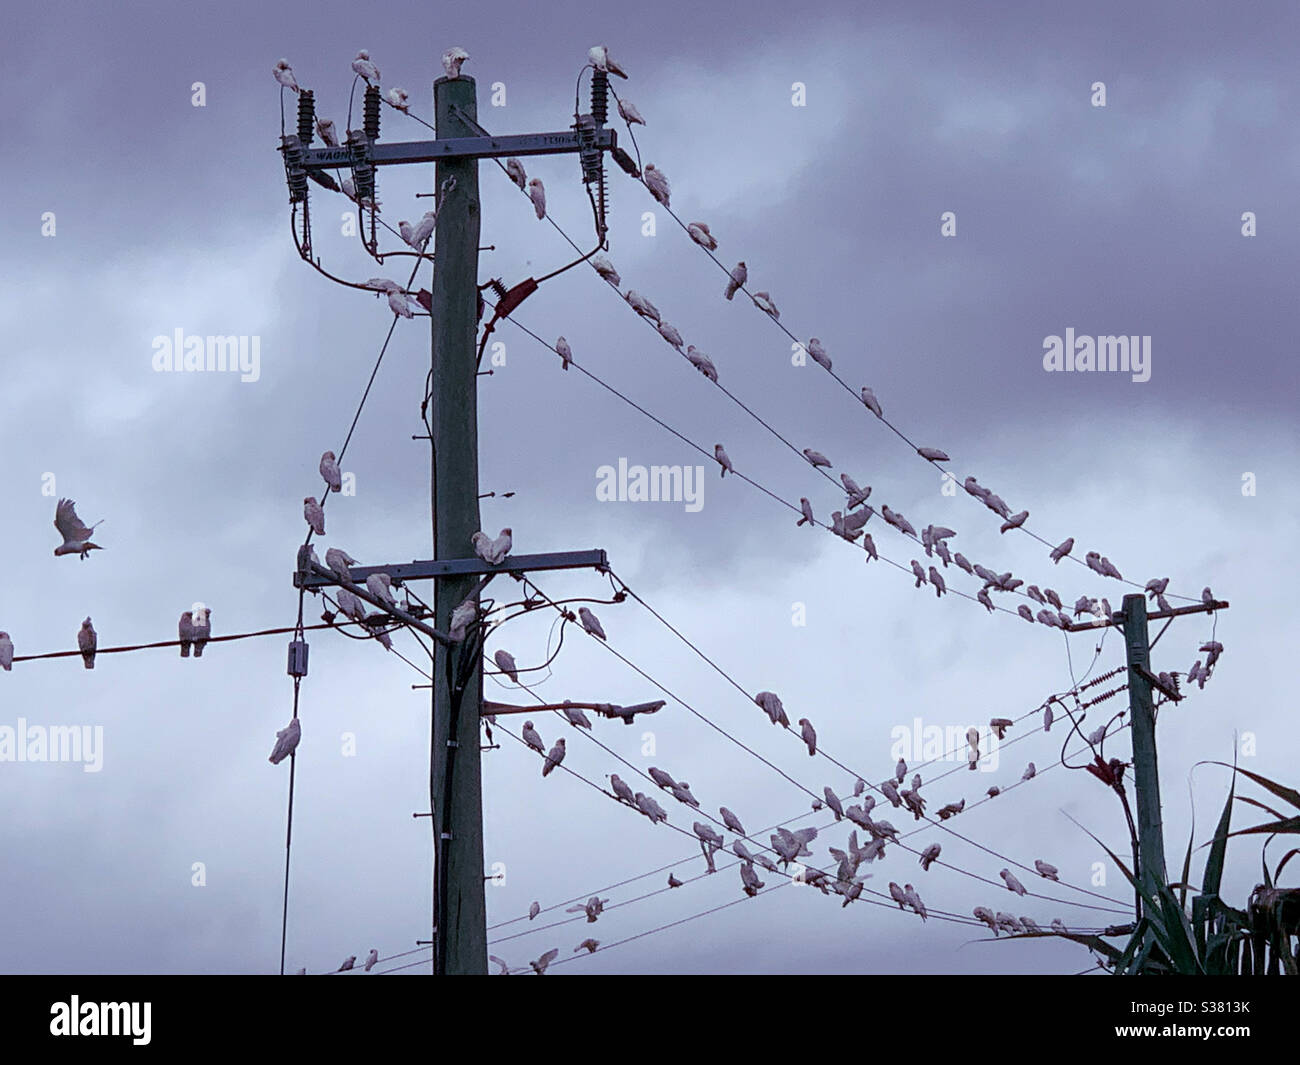 Birds of a feather flock together, birds on a wire Stock Photo